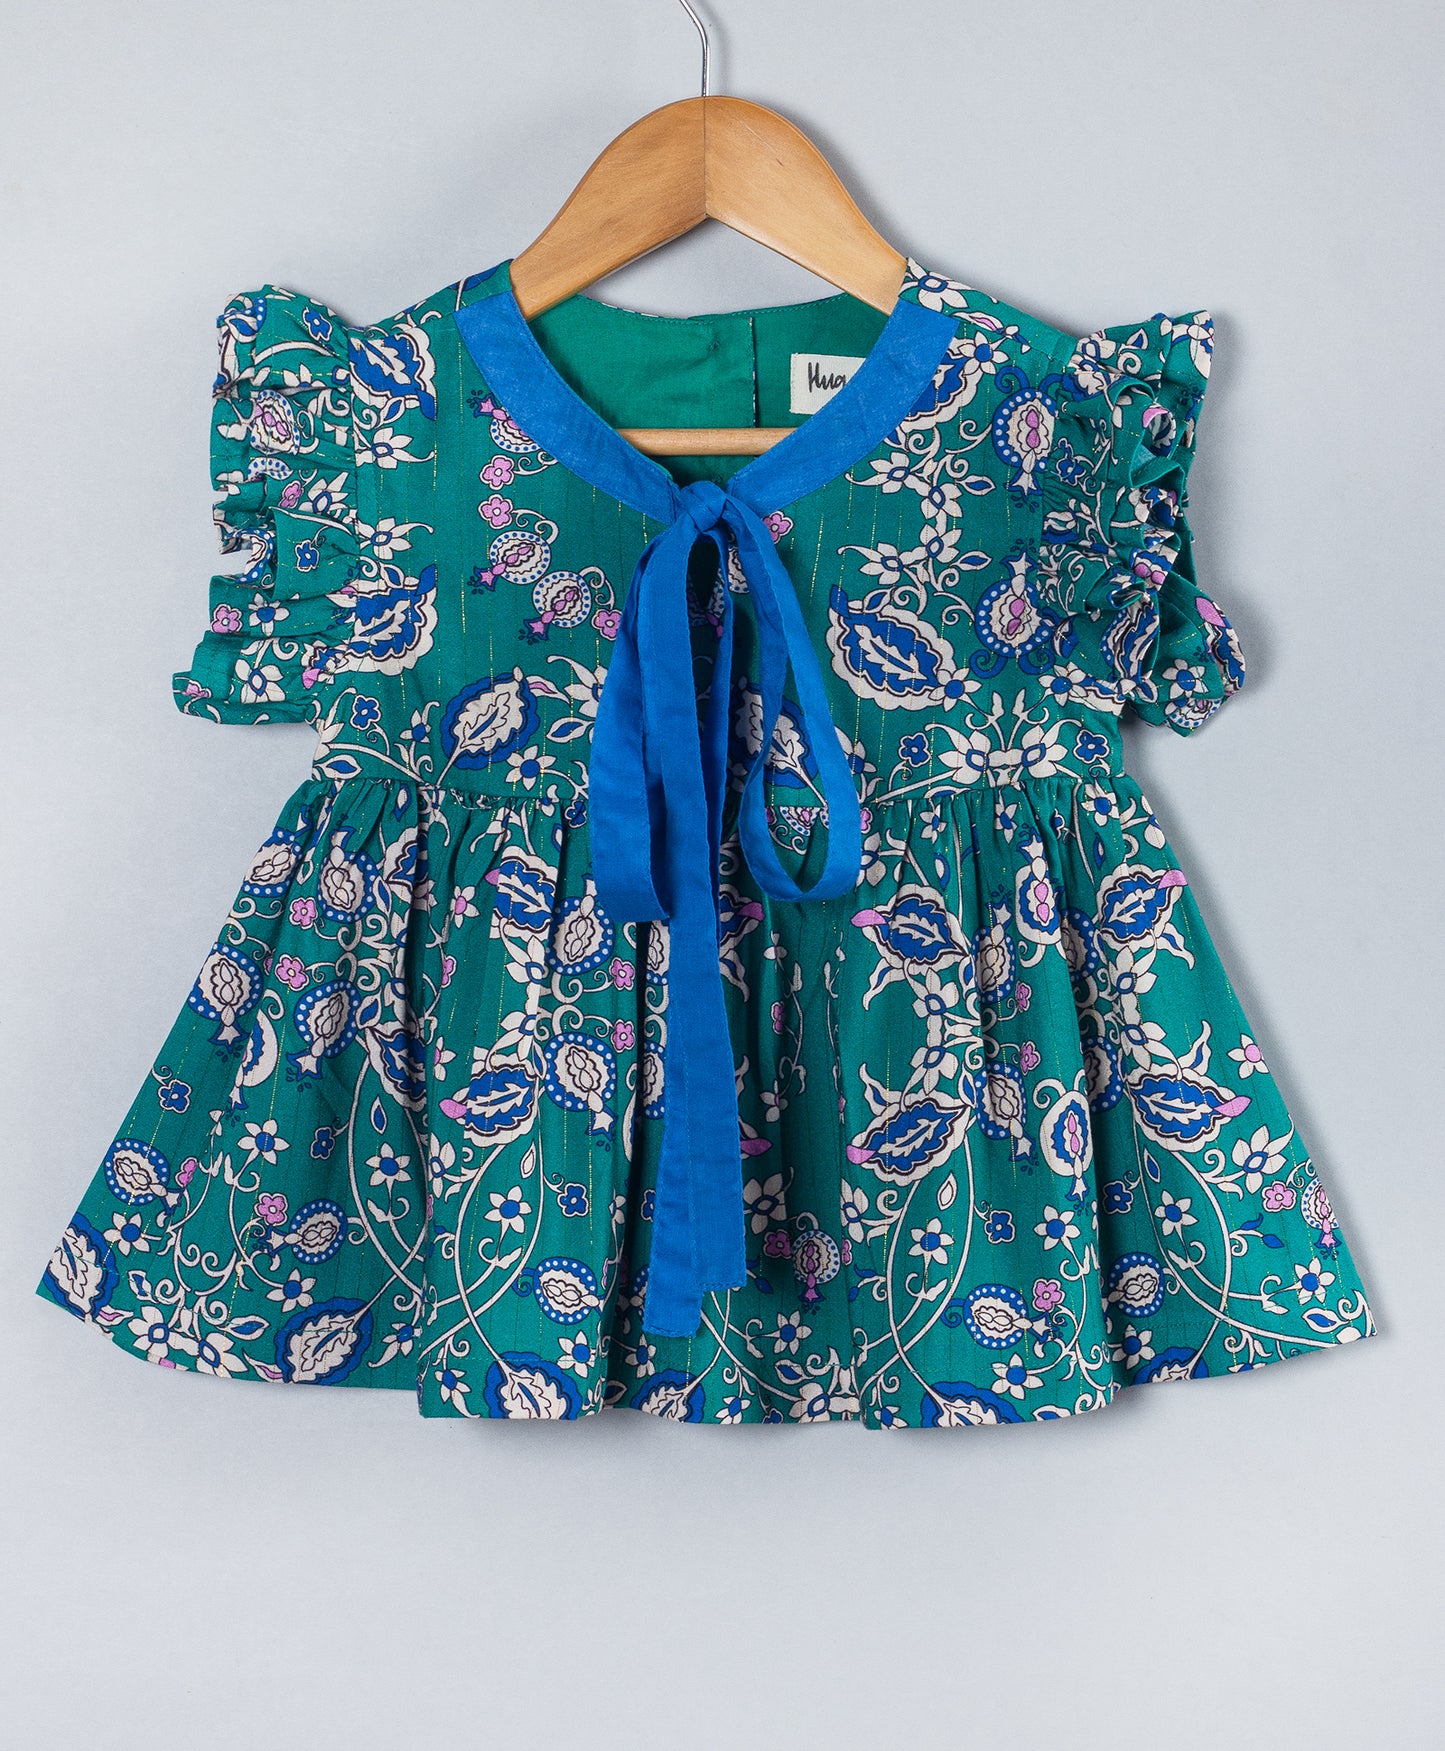 GREEN PAISLEY PRINT TOP WITH CONTRAST BINDING AND TIE UP AT NECK